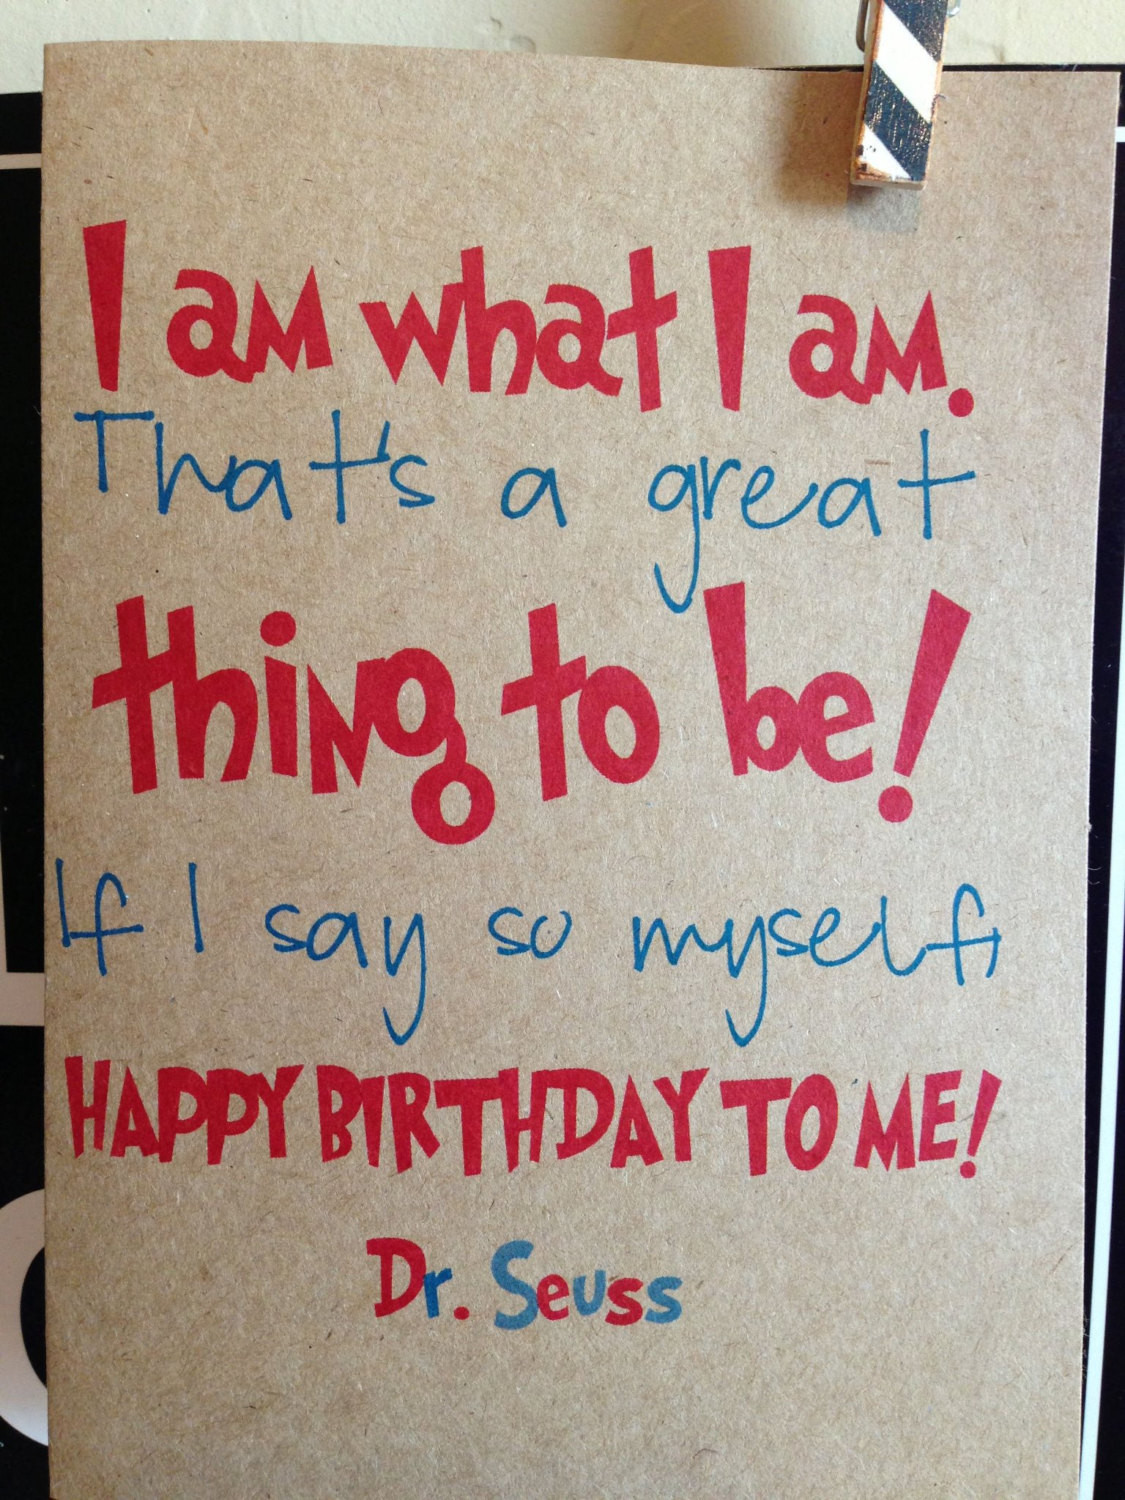 Birthday To Me Quotes
 I am what I am thats a great thing to be If I say by